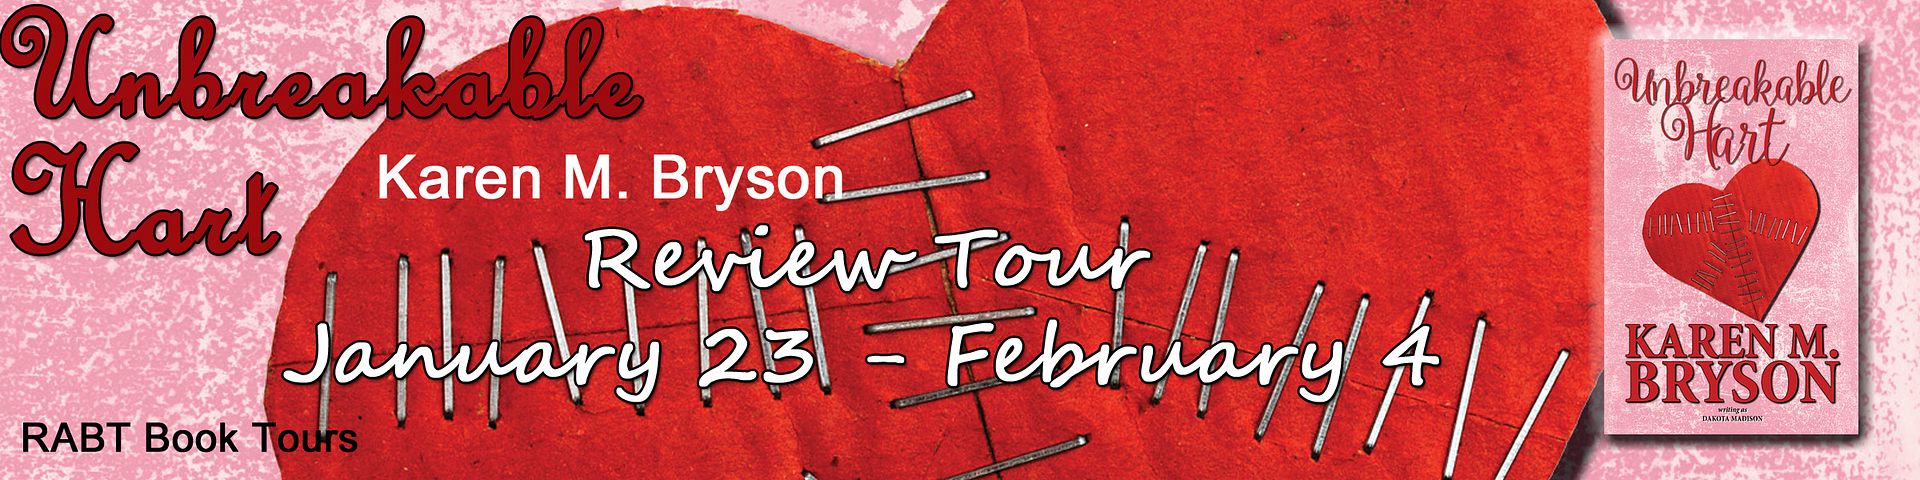 Blog Tour: Unbreakable Hart by @karenmbryson #review